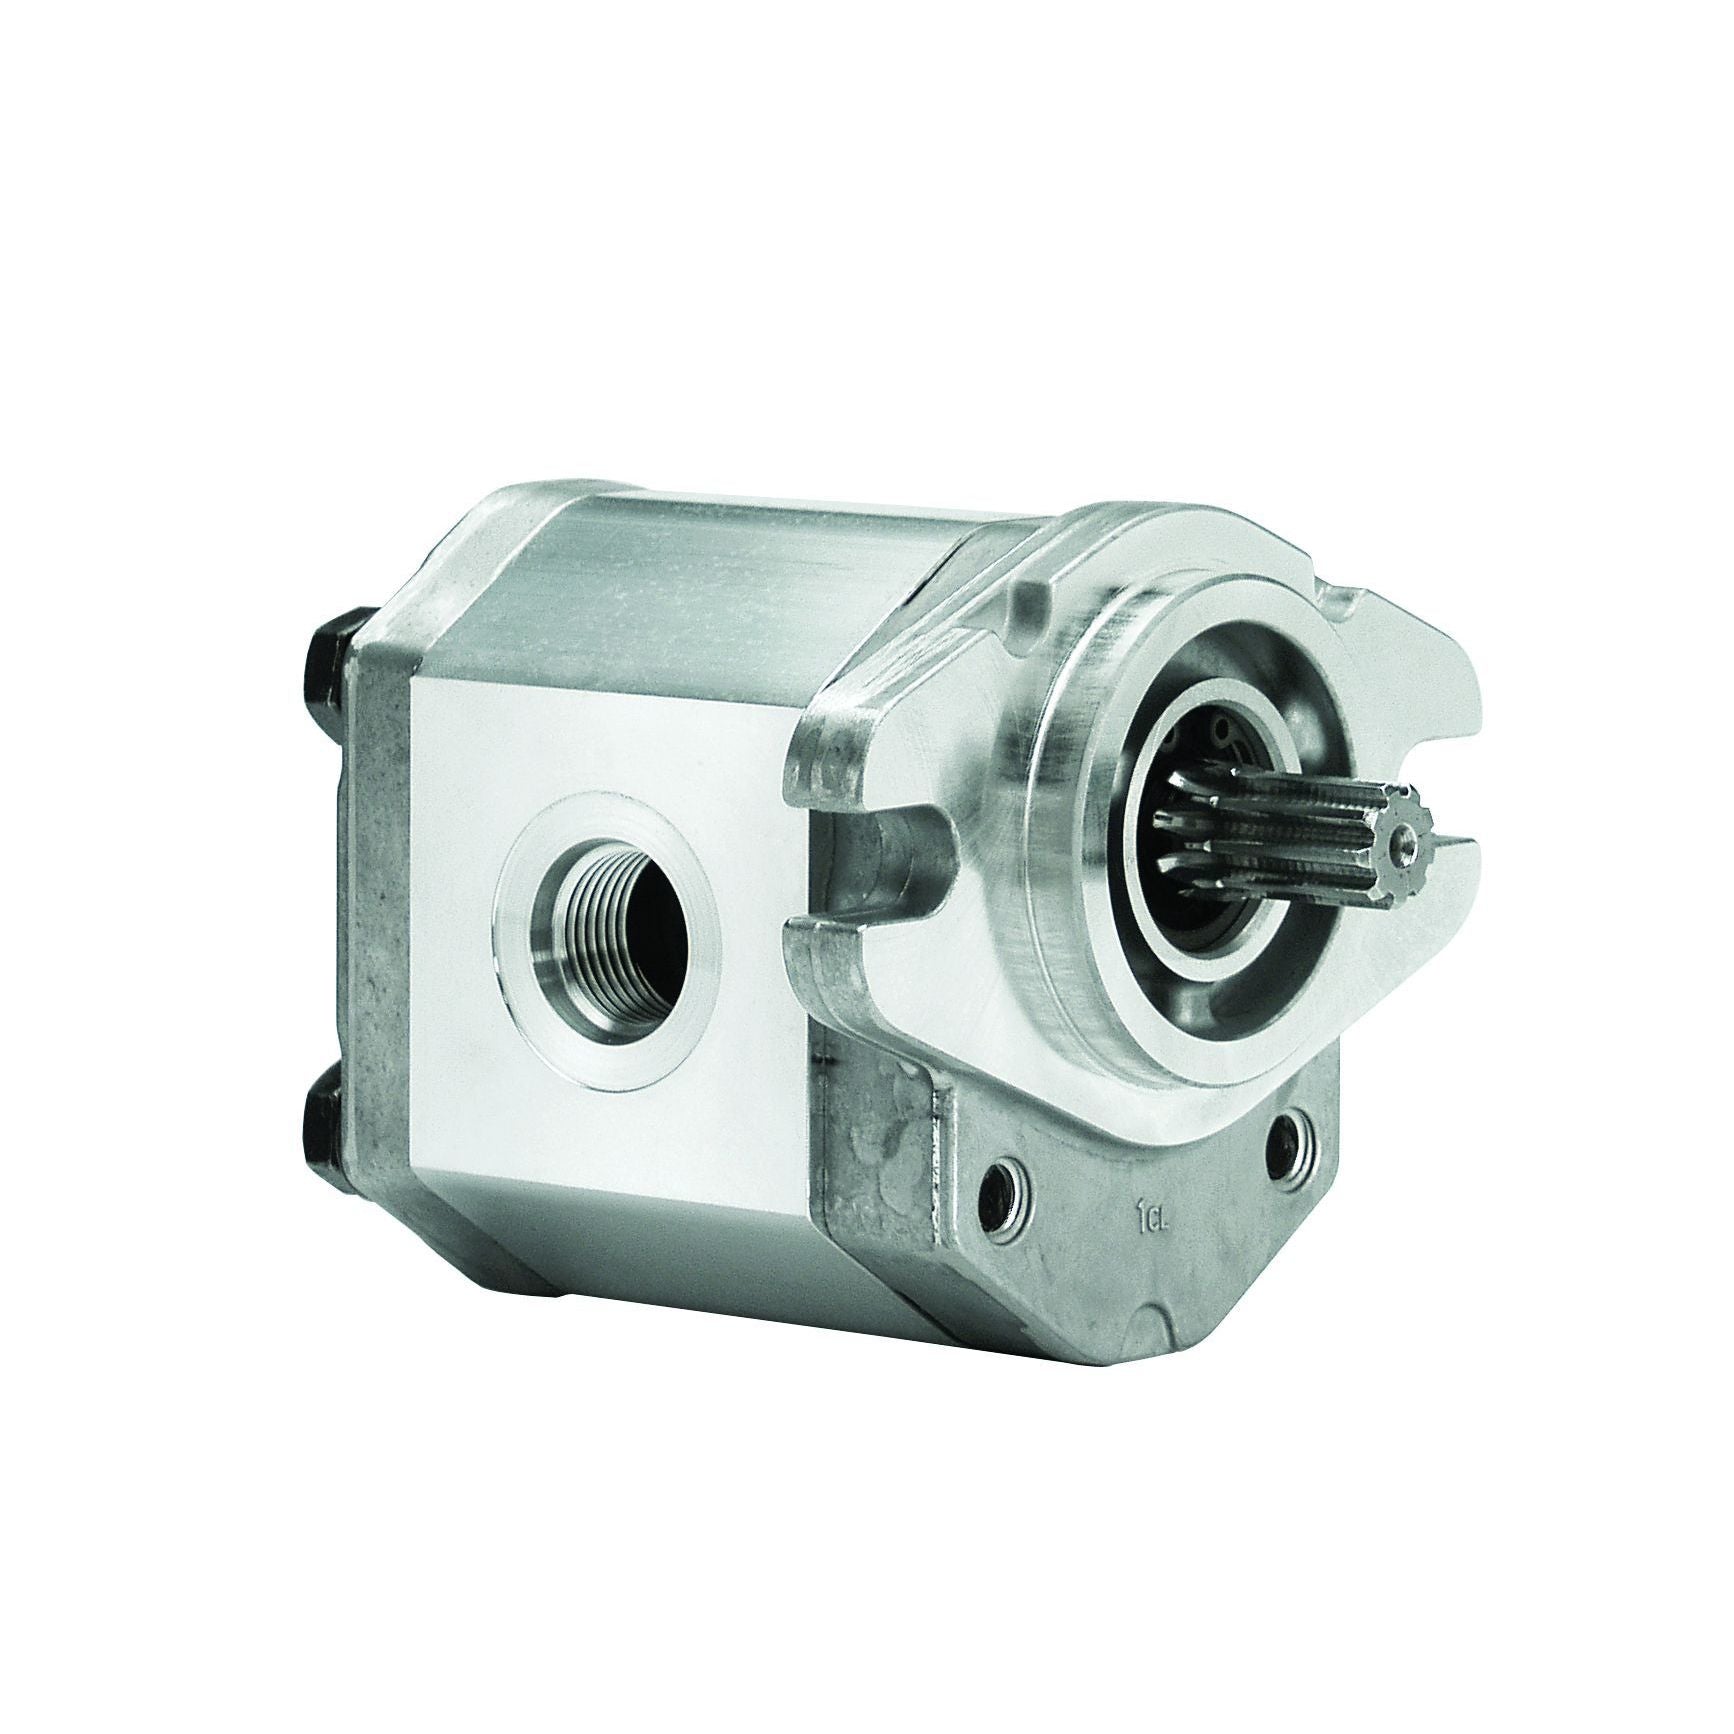 ALP2A-D-10-S1 : Marzocchi Gear Pump, CW, 7cc (0.427in3), 3.33 GPM, 3625psi, 4000 RPM, #12 SAE (3/4") In, #10 SAE (5/8") Out, Splined Shaft 9T 16/32DP, SAE A 2-Bolt Mount